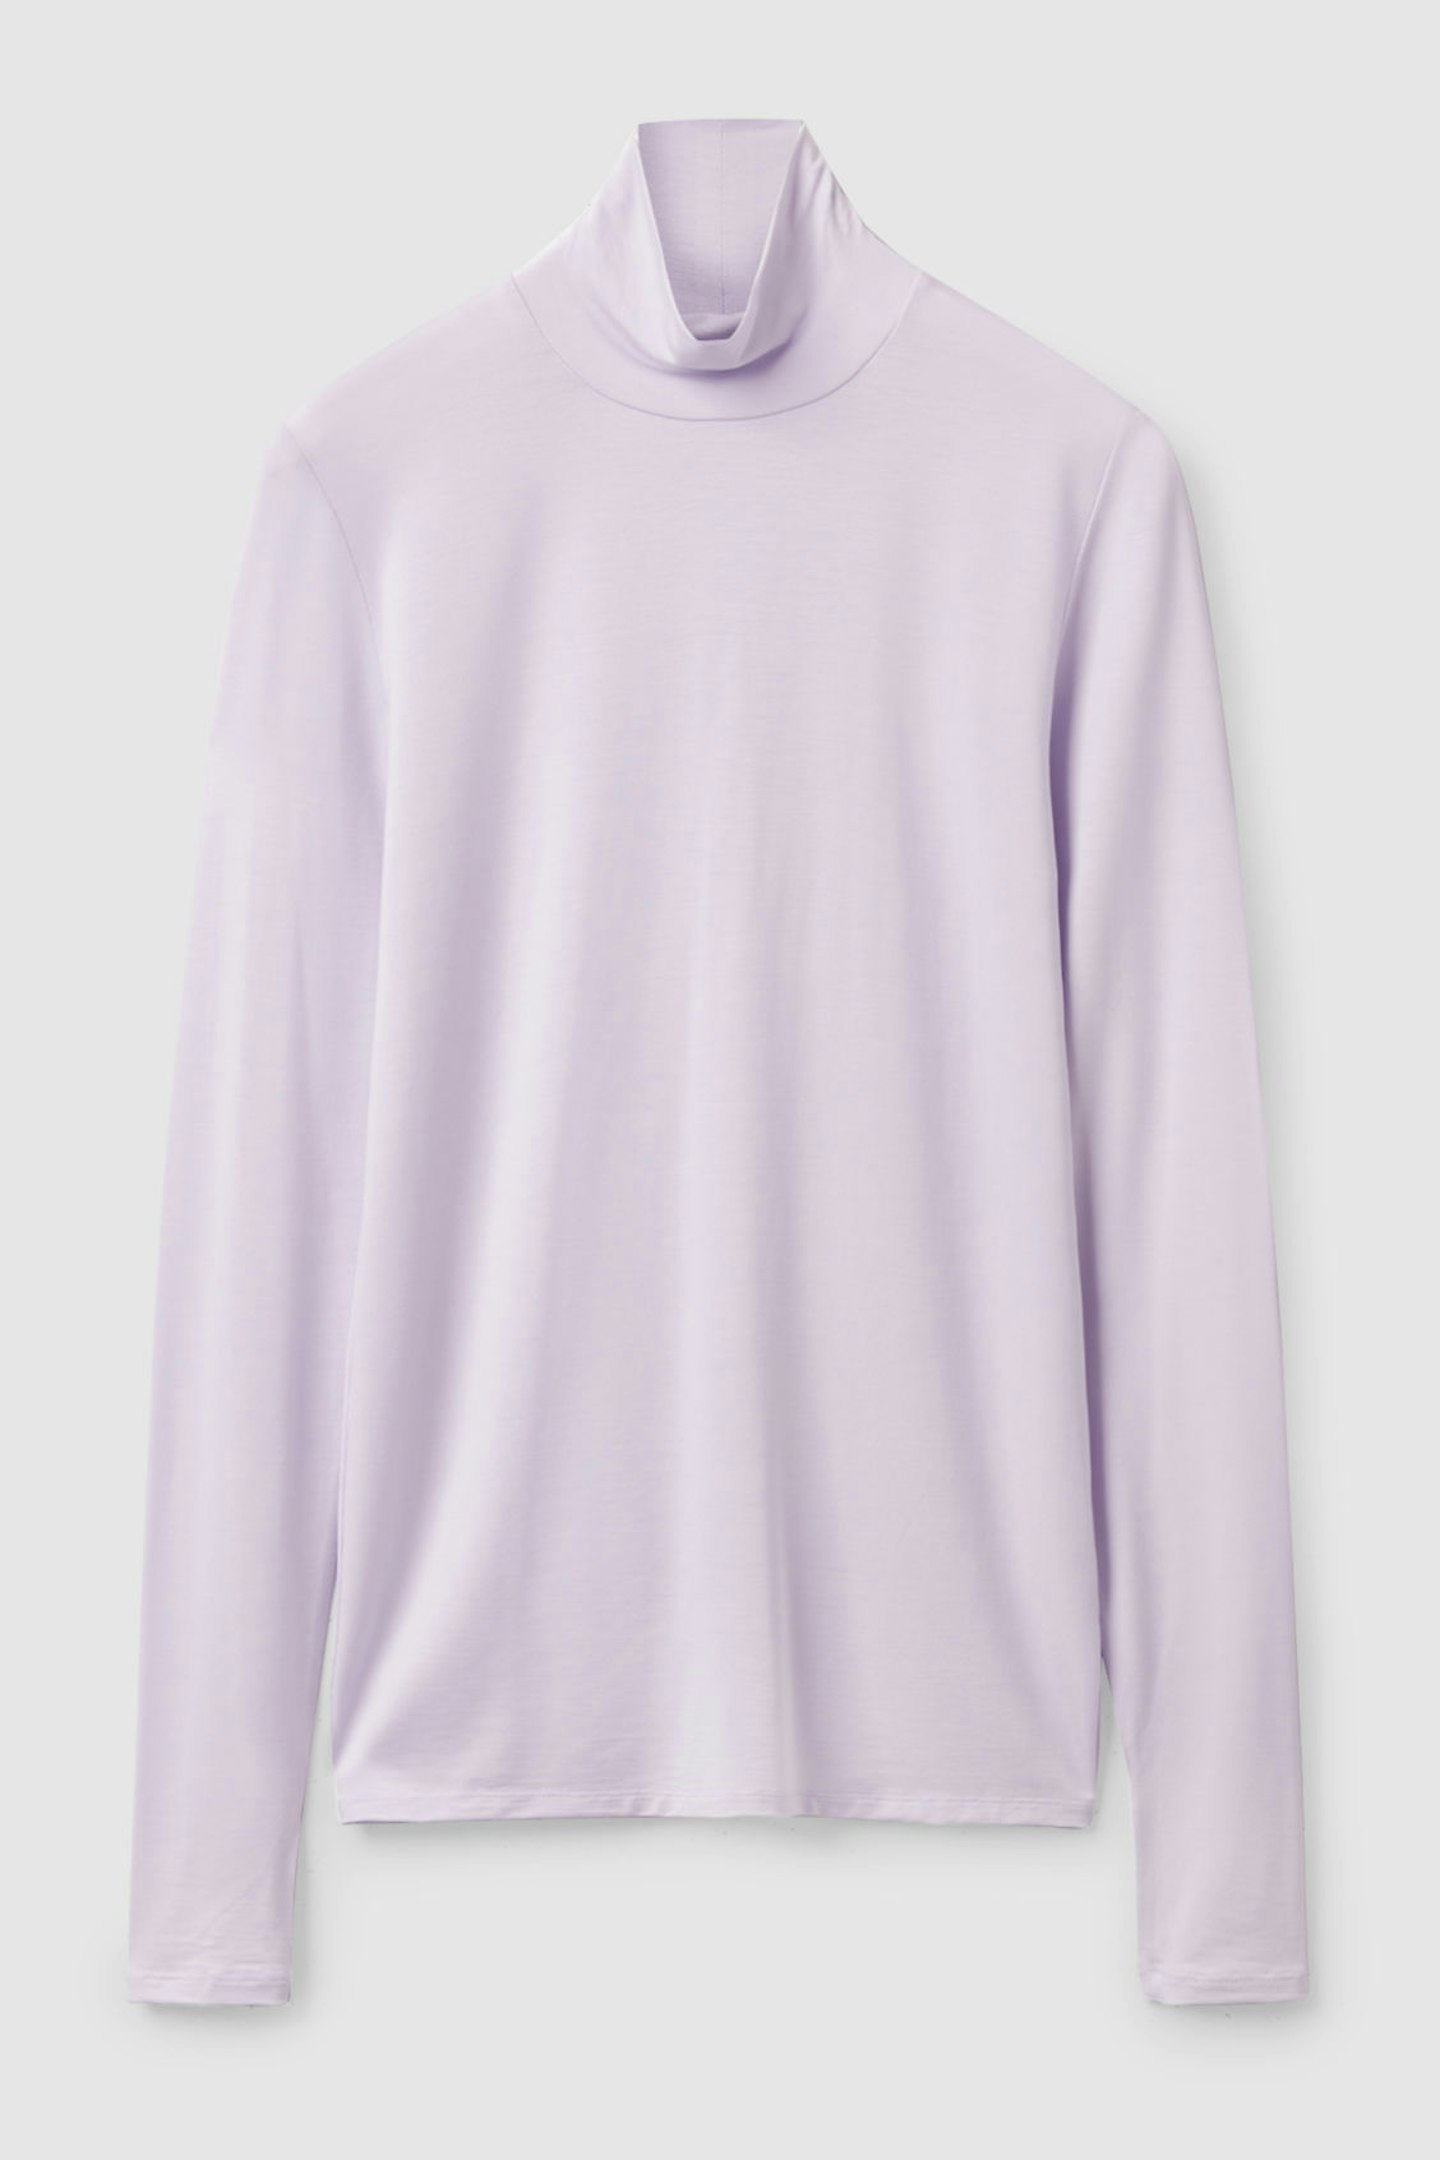 Long-Sleeve Top, WAS £45 NOW £22.50